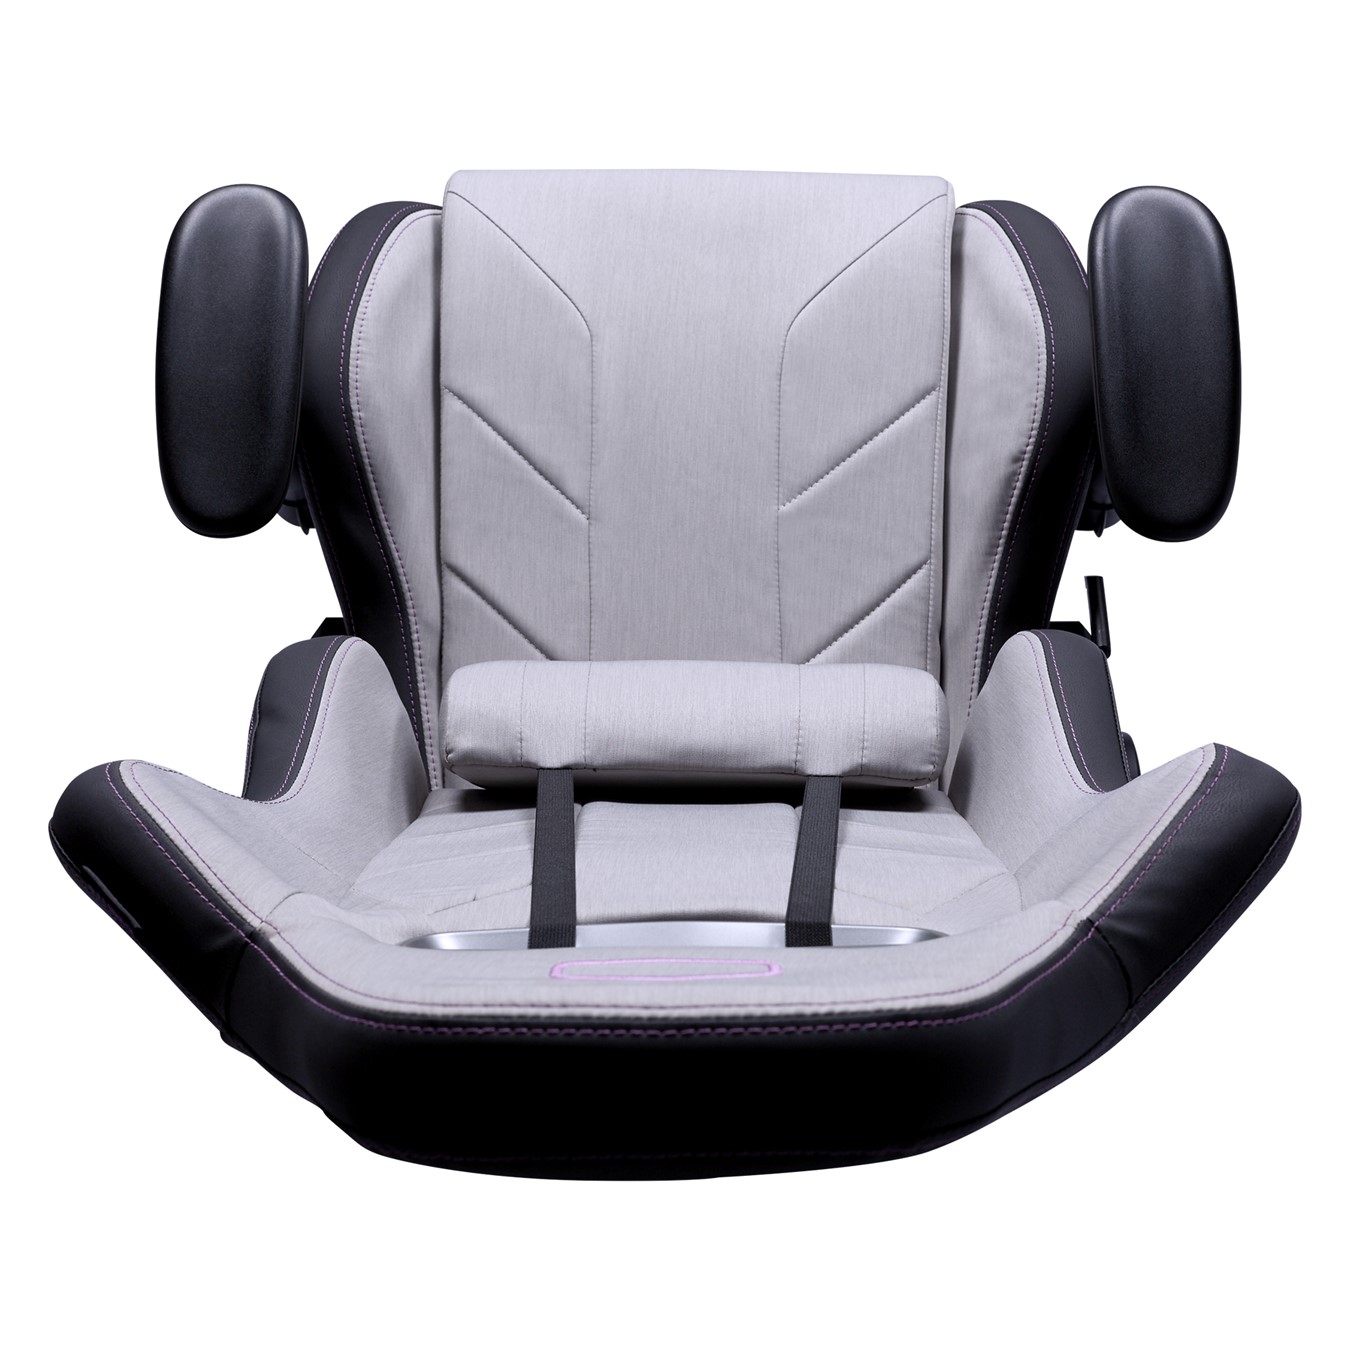 Caliber R2C Gaming Chair - Top angle view